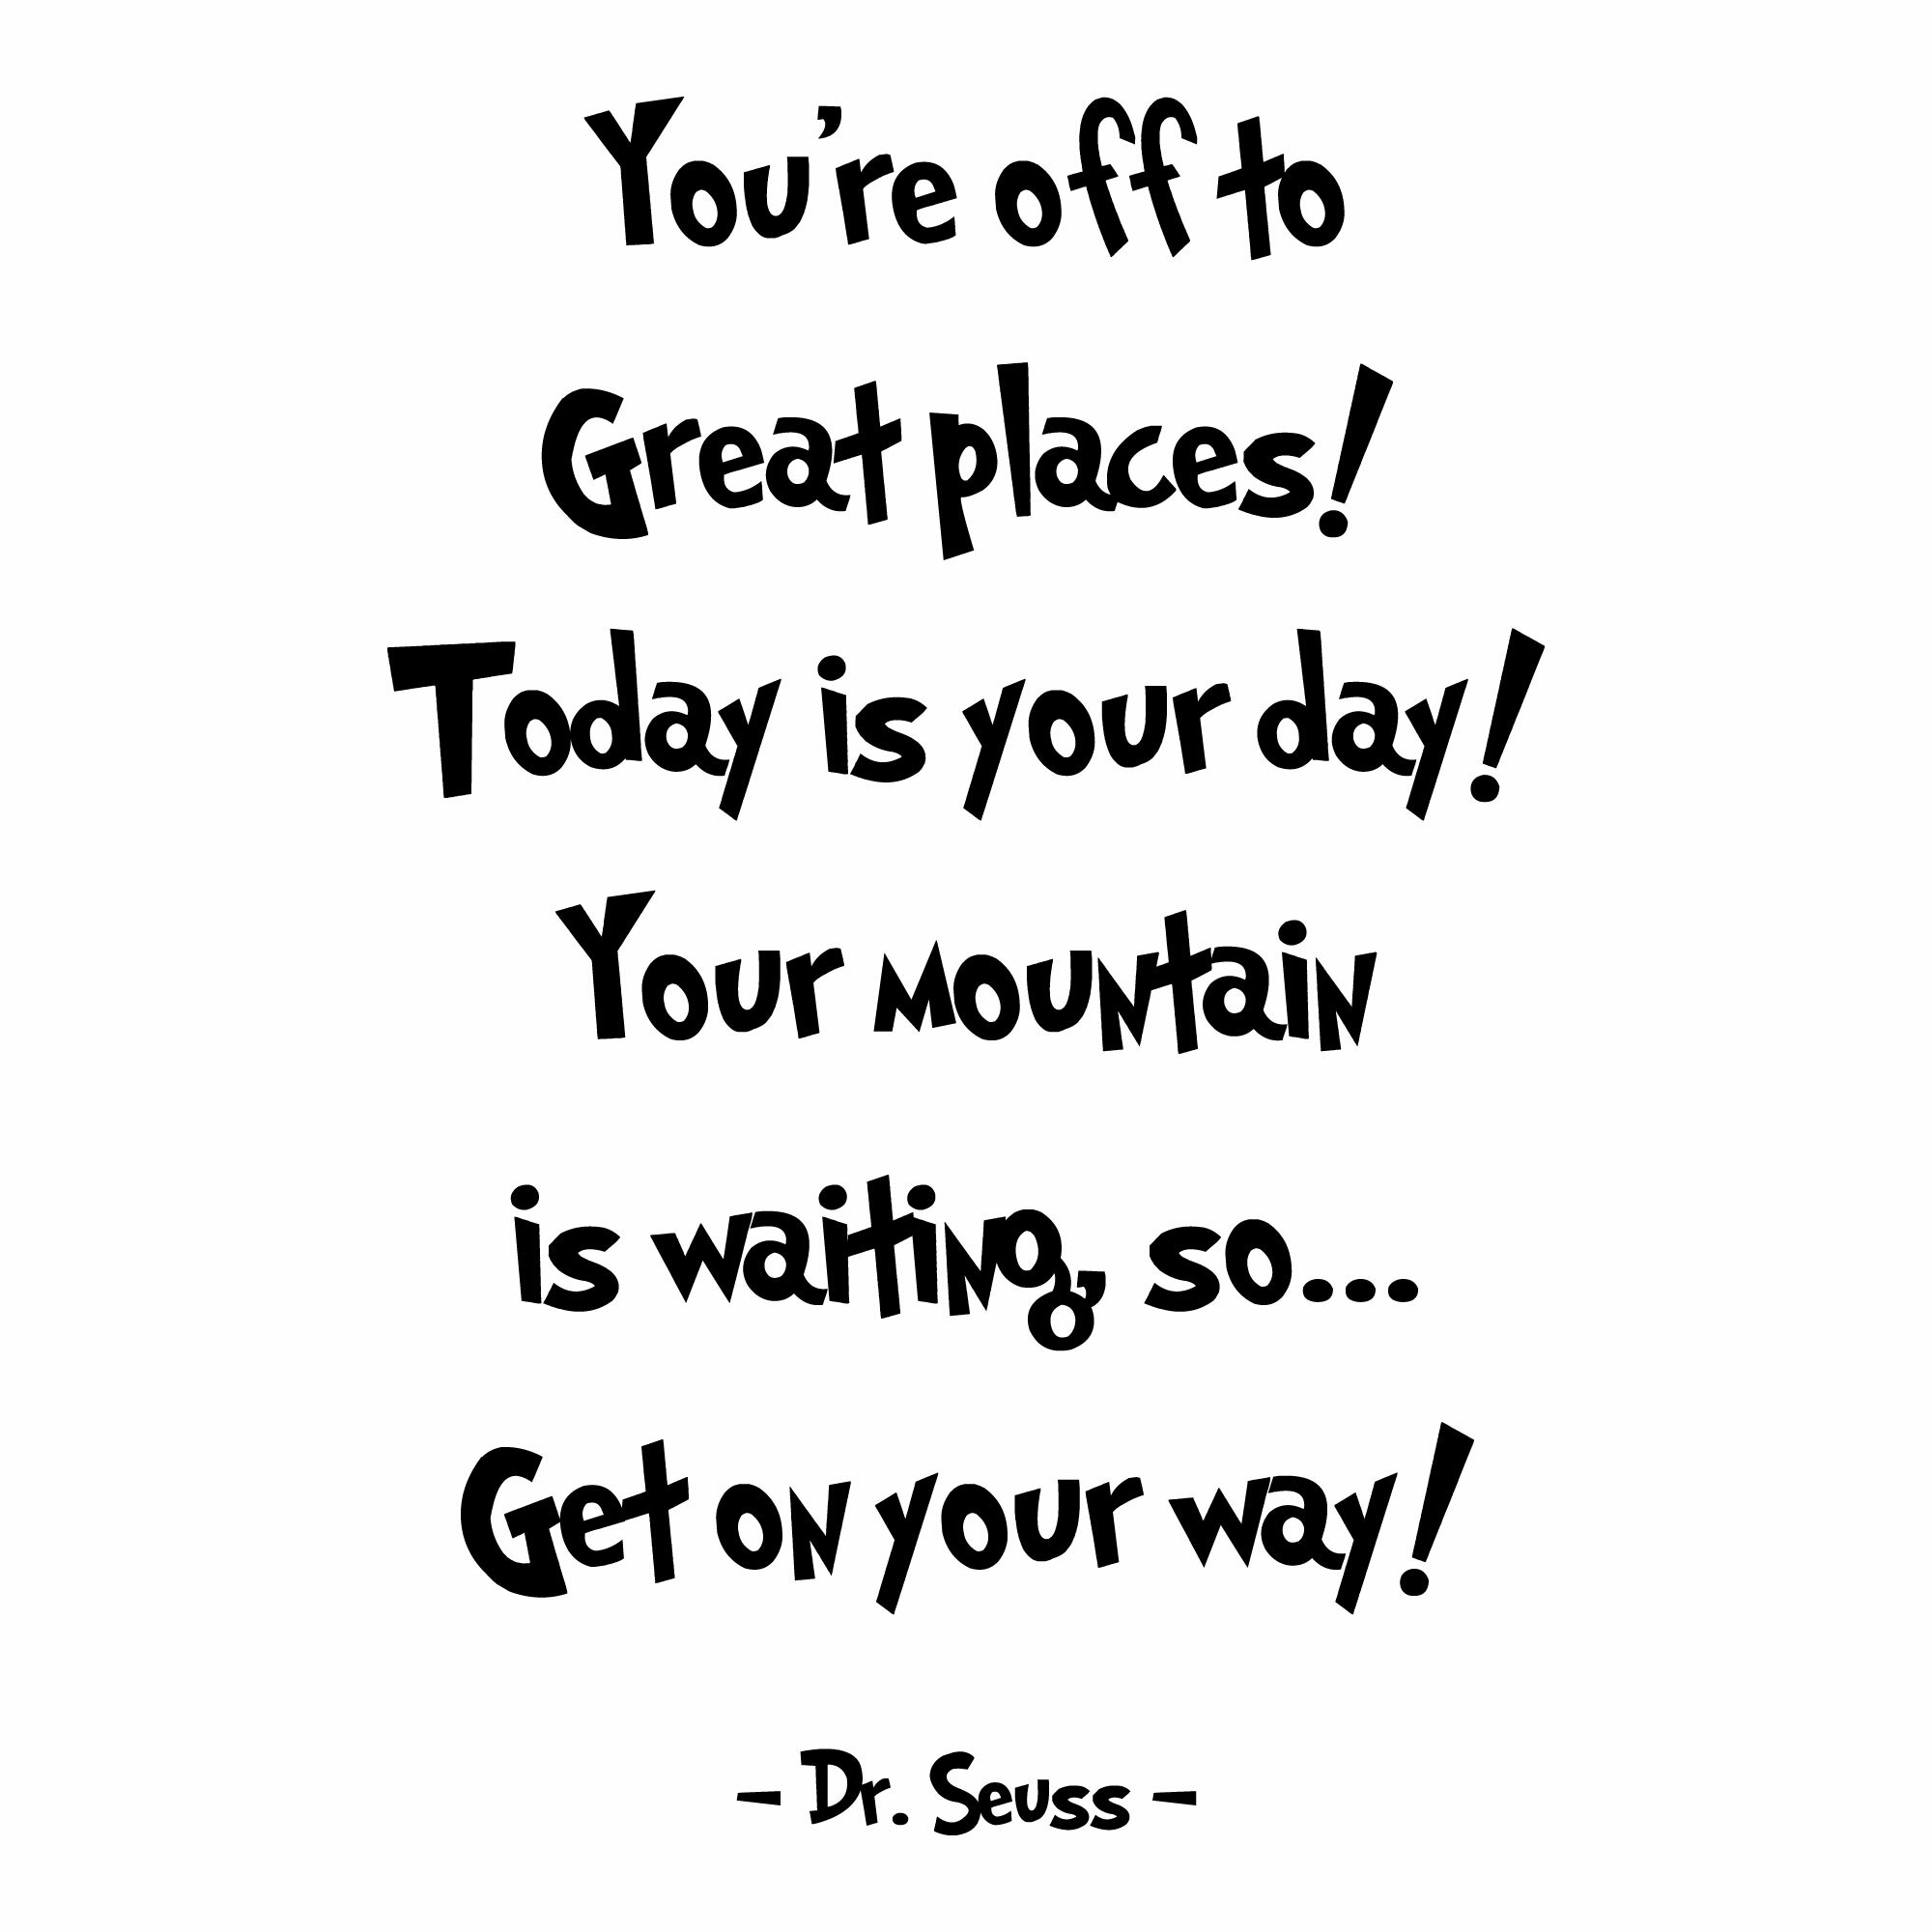 Seuss in 7 sizes Today is your day by Dr Poster You're off to great places